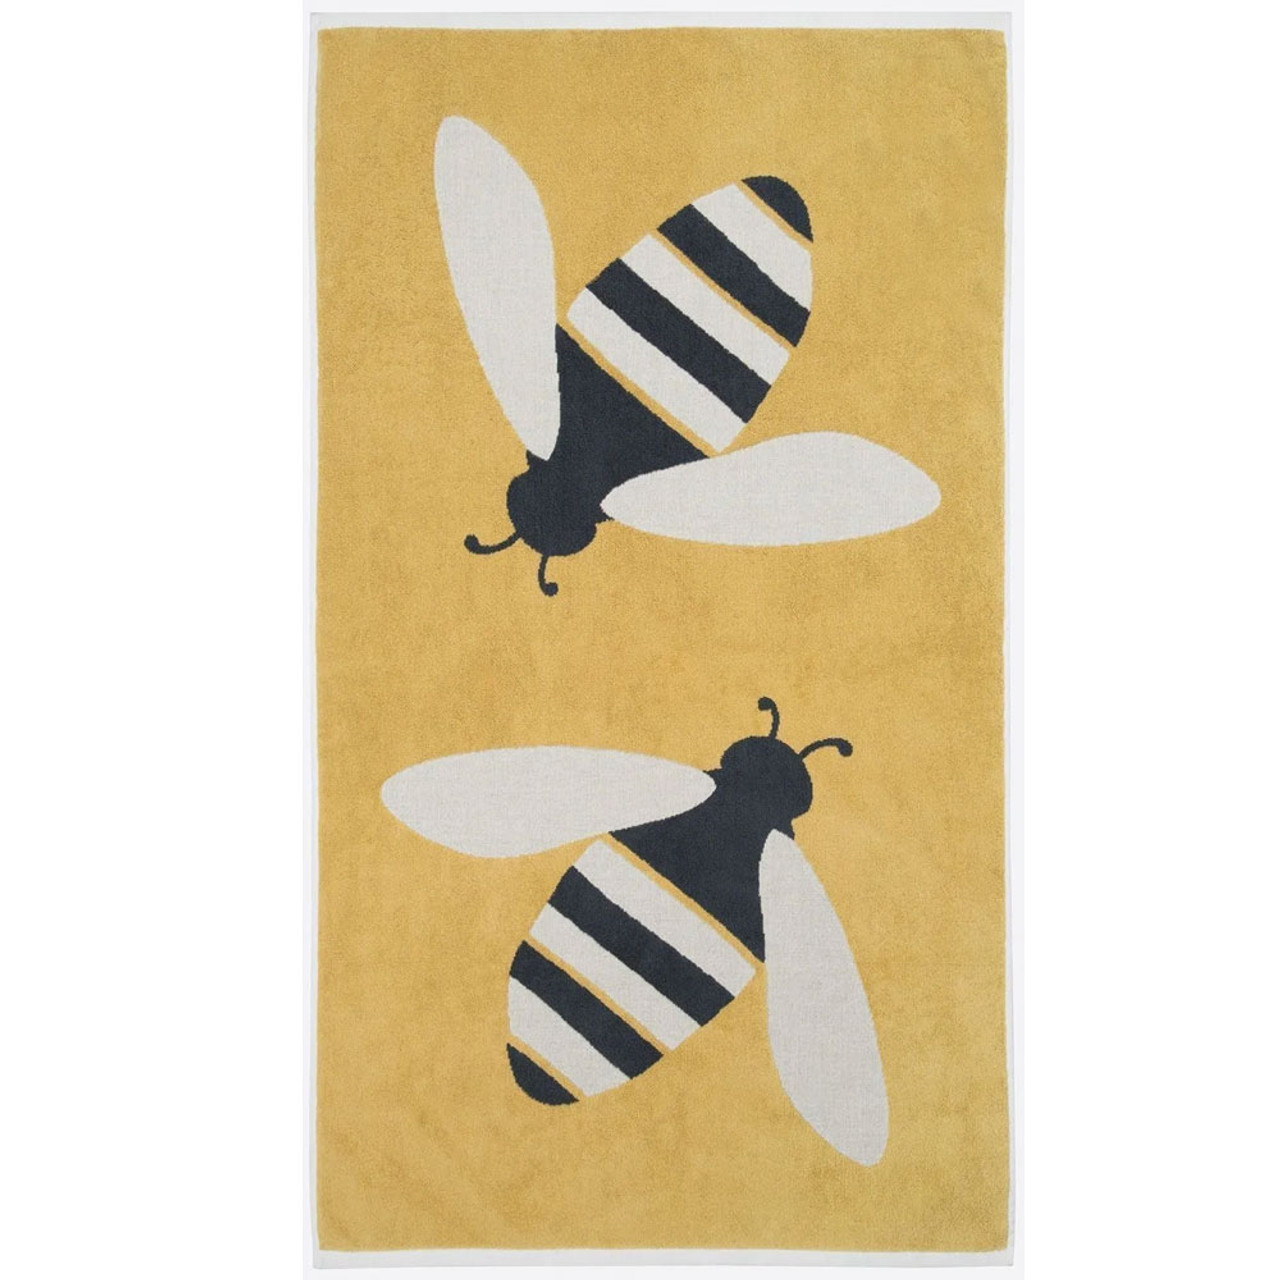 Anorak Organic Cotton Towels - Buzzy Bees